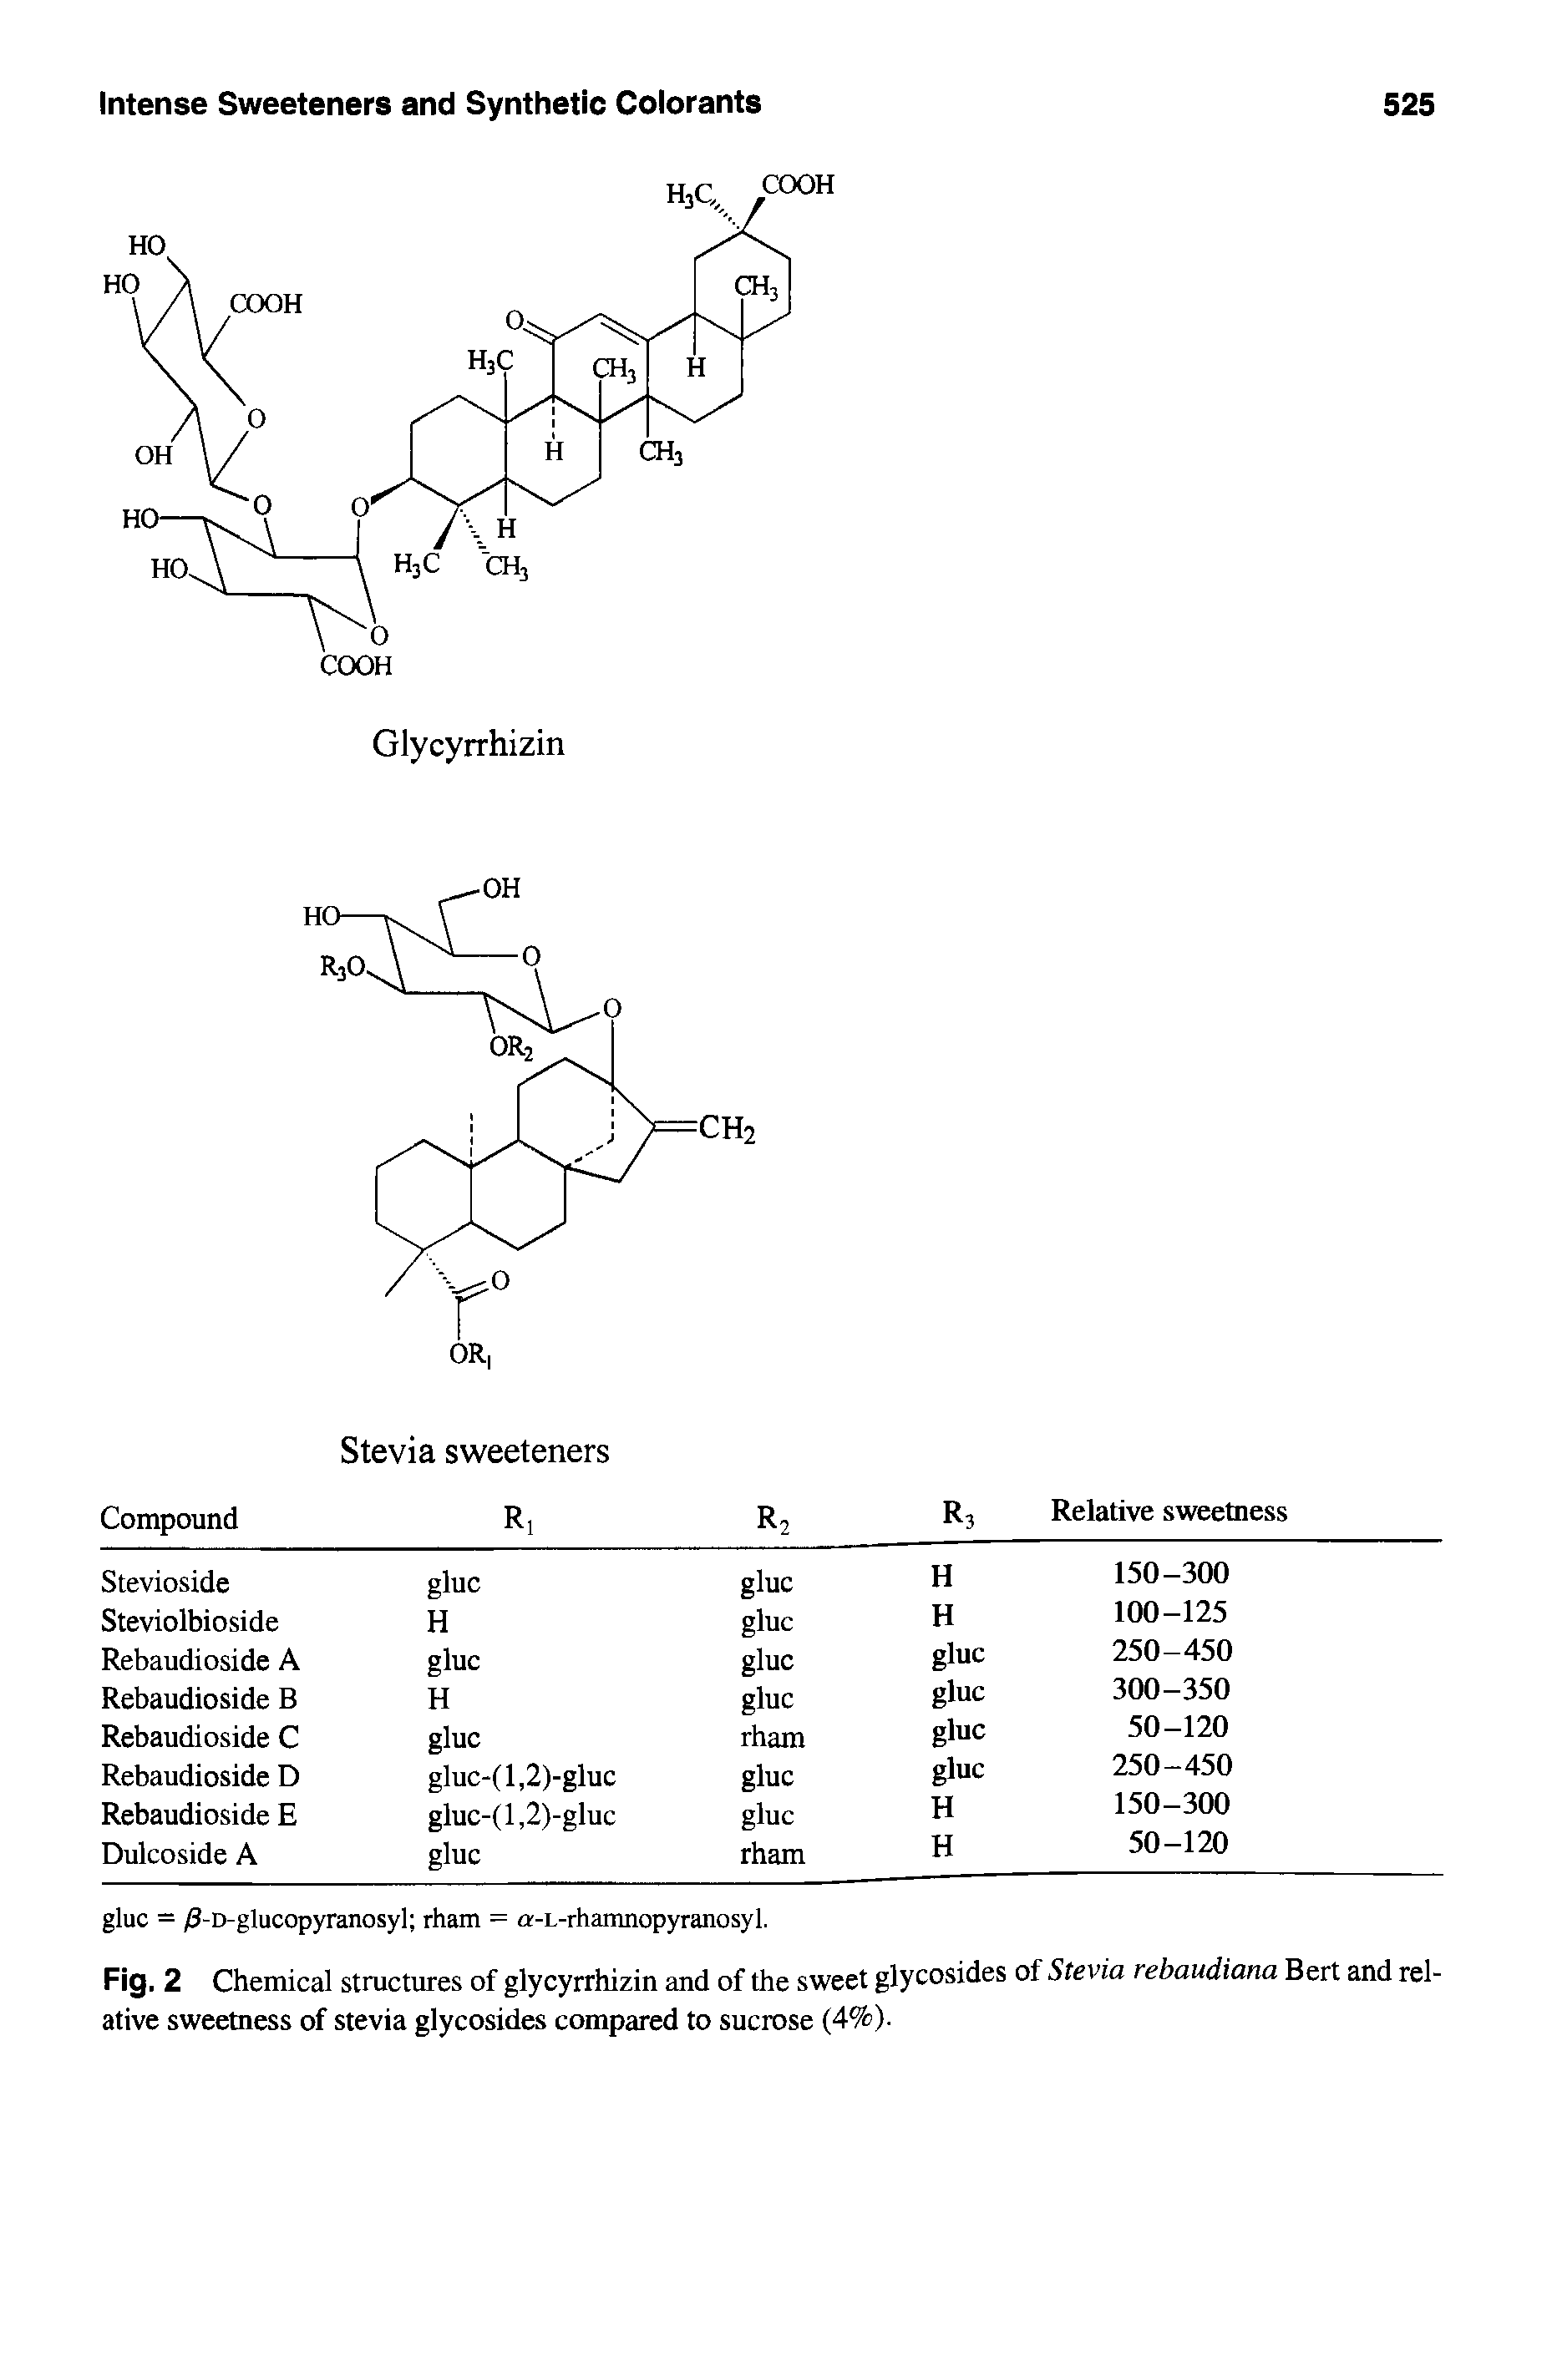 Fig. 2 Chemical structures of glycyrrhizin and of the sweet glycosides of Stevia rebaudiana Bert and relative sweetness of stevia glycosides compared to sucrose (4%) ...